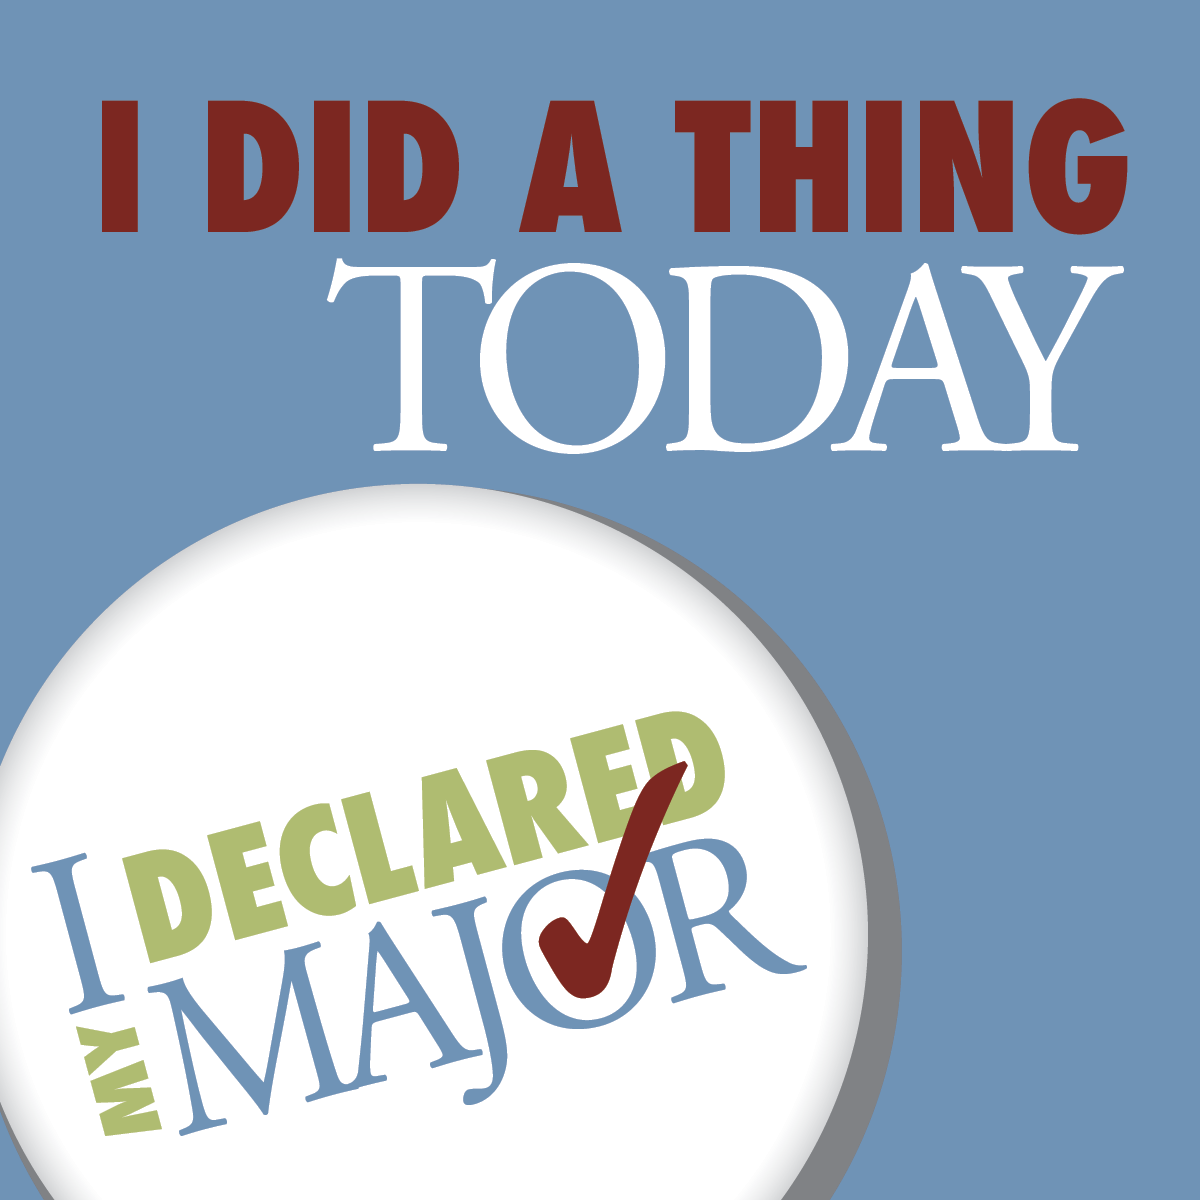 Major declaration social media image with blue background that says "I did a thing today" with a checkmark next to declared my major..